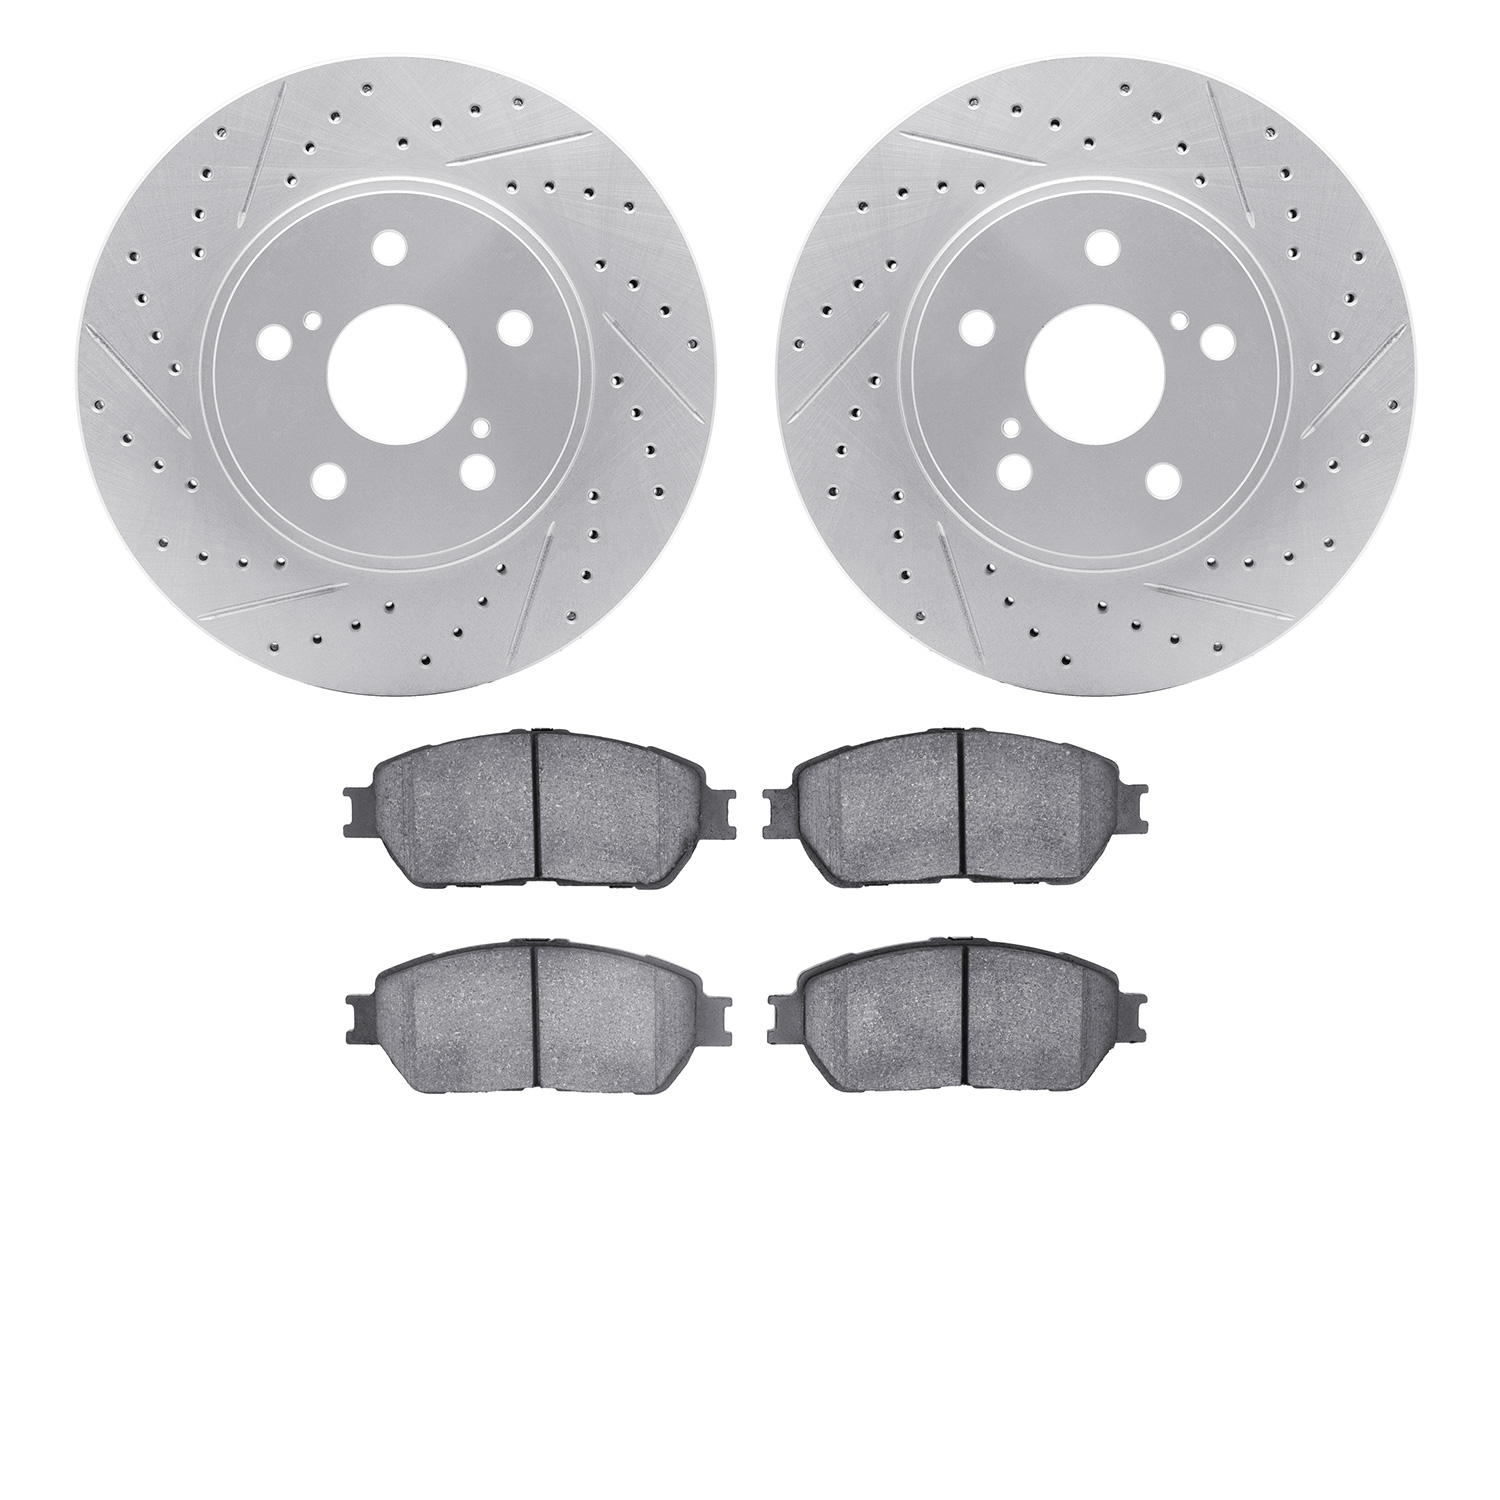 2502-76007 Geoperformance Drilled/Slotted Rotors w/5000 Advanced Brake Pads Kit, 2003-2006 Lexus/Toyota/Scion, Position: Front